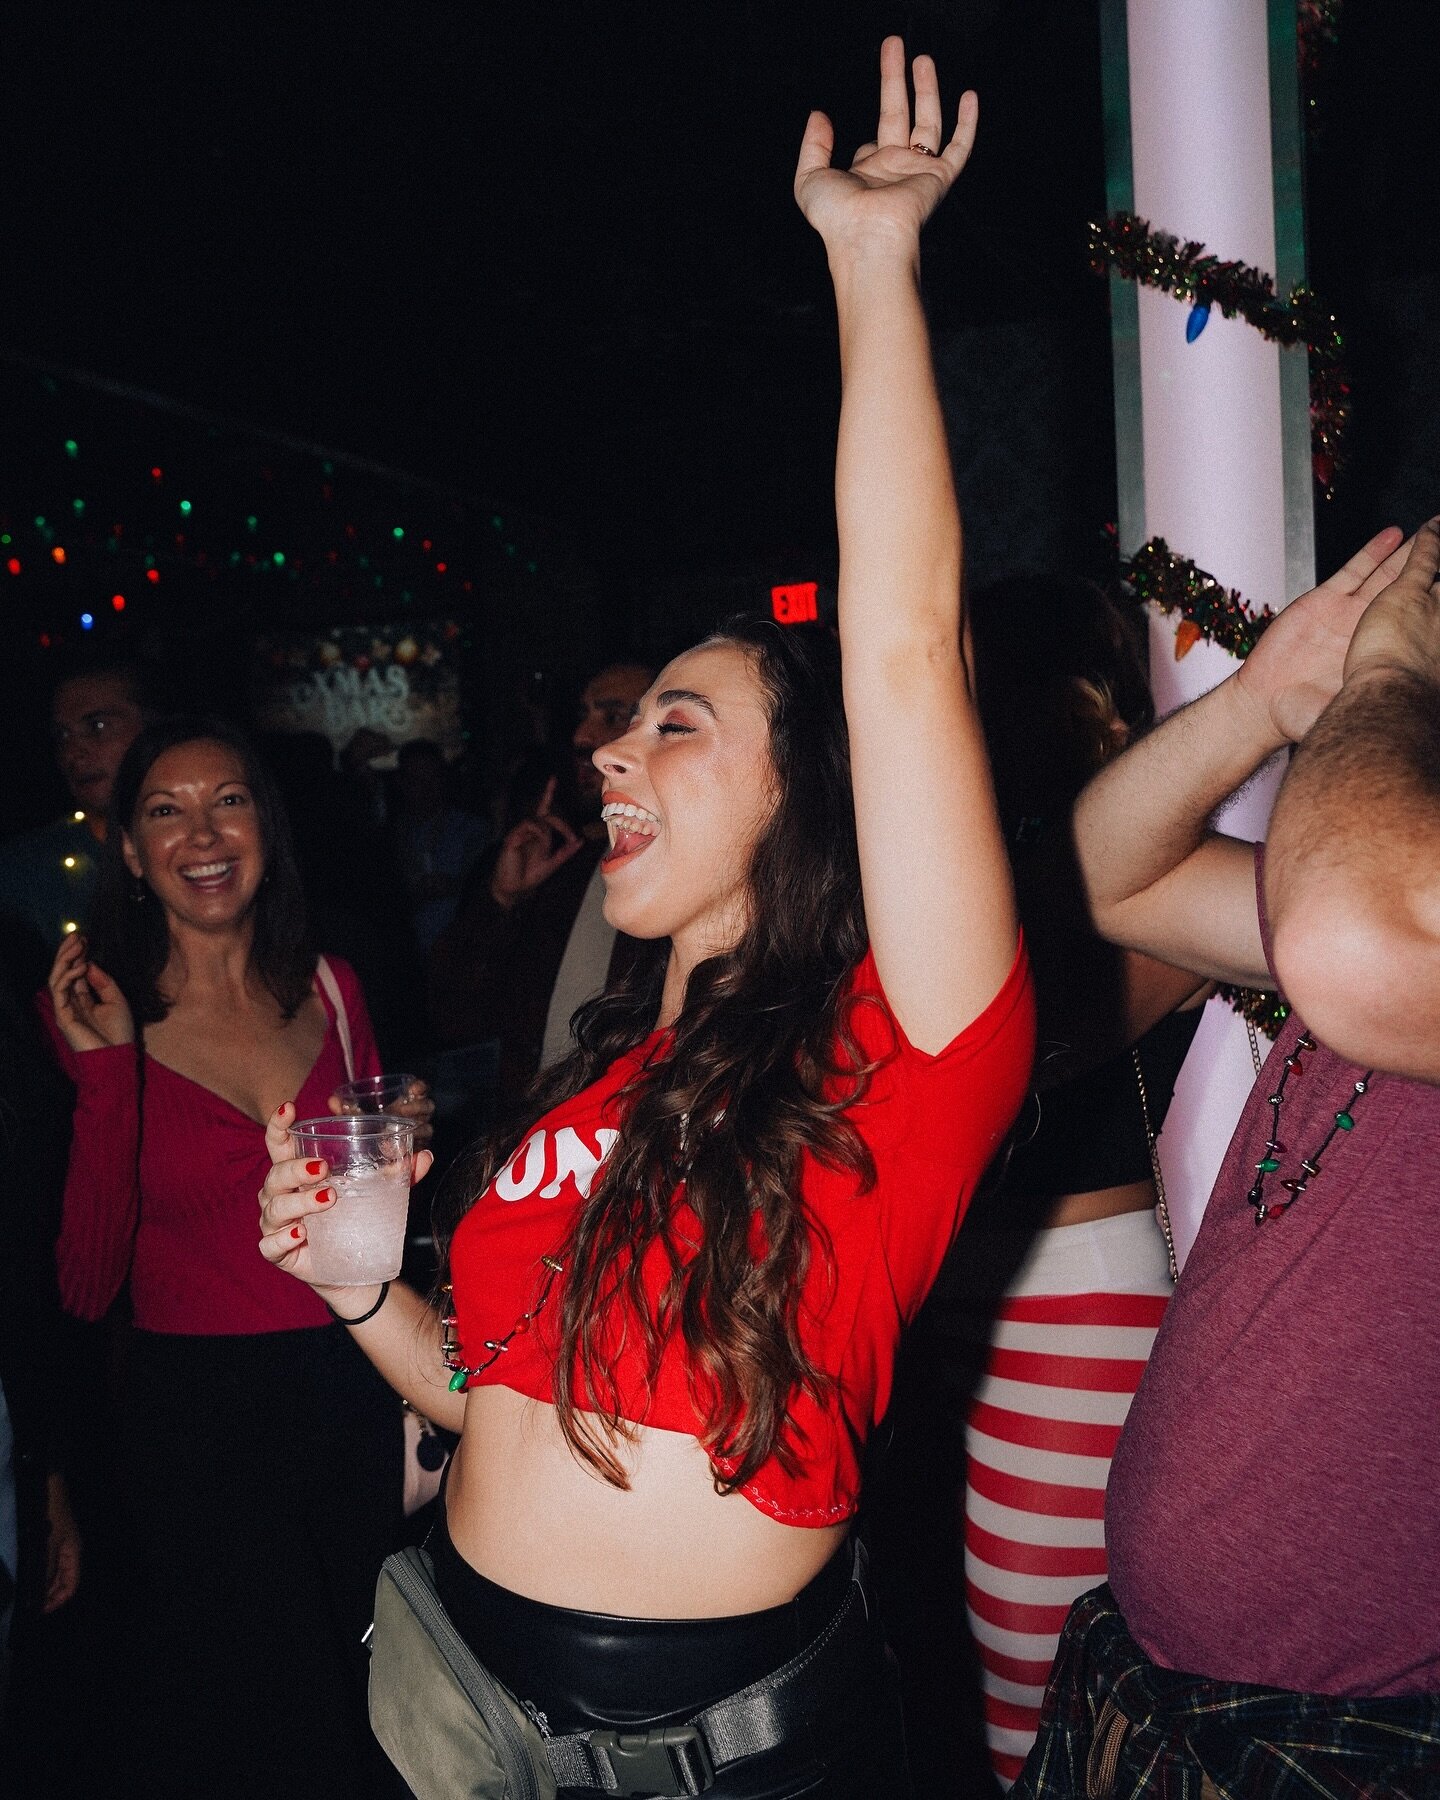 put your hands up if you can still feel the xmas spirit because we sure can ✨

come see us 4p-late with half price cocktail happy hour 4-6 🍸